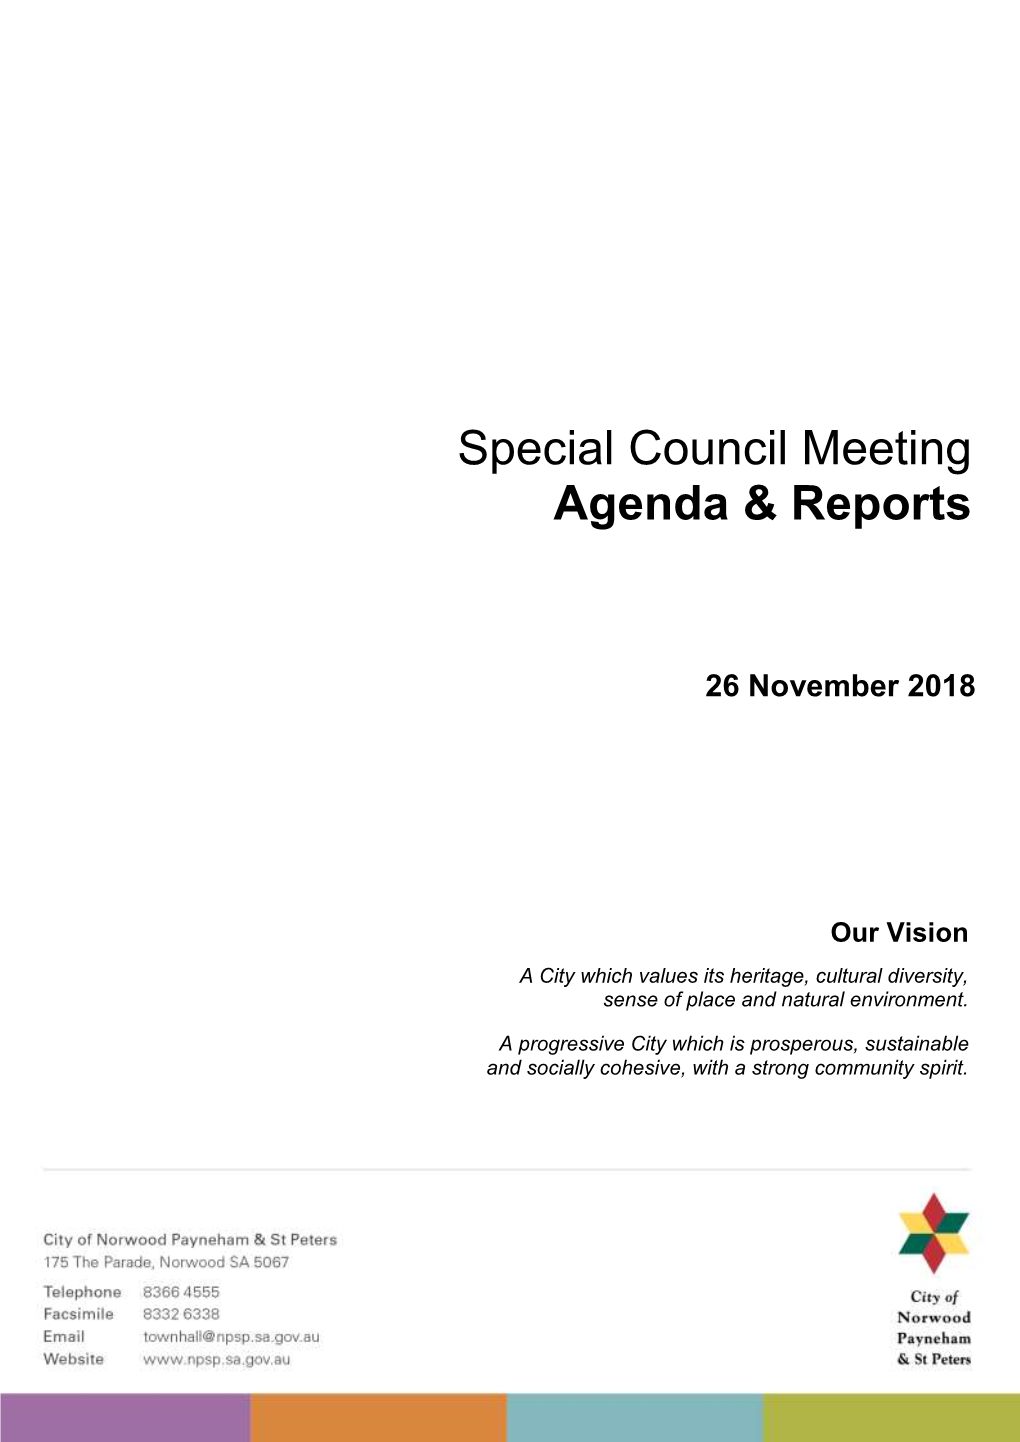 Special Council Meeting Agenda & Reports